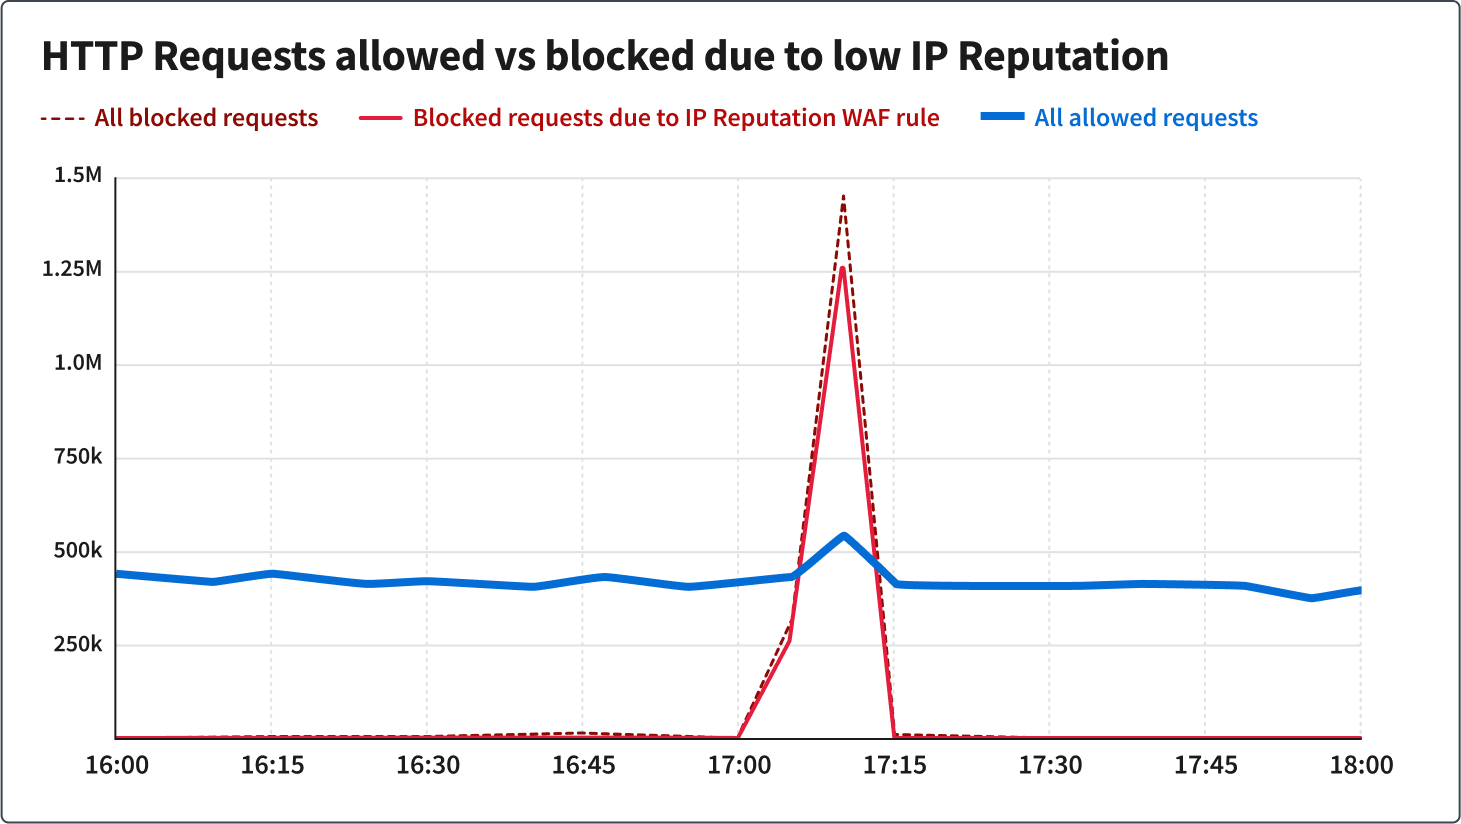 This line graph compares the Challenges issued to IP Addresses after exceeding HTTP request rate limit to all allowed requests. From 8:00 to 16:00, all allowed requests line hovered around the 400,000 tick on the Y-axis, indicating requests. Over the same timeframe, the challenges after rate limit line is near zero until about 12:00, where it rises slowly until about 12:20 and then rapidly, spiking a few times between the ticks at 1.2 and 1.4 Million requests just after 13:00, then drops immediately back to zero around 13:30 and remains near zero until 16:00, where the graph ends